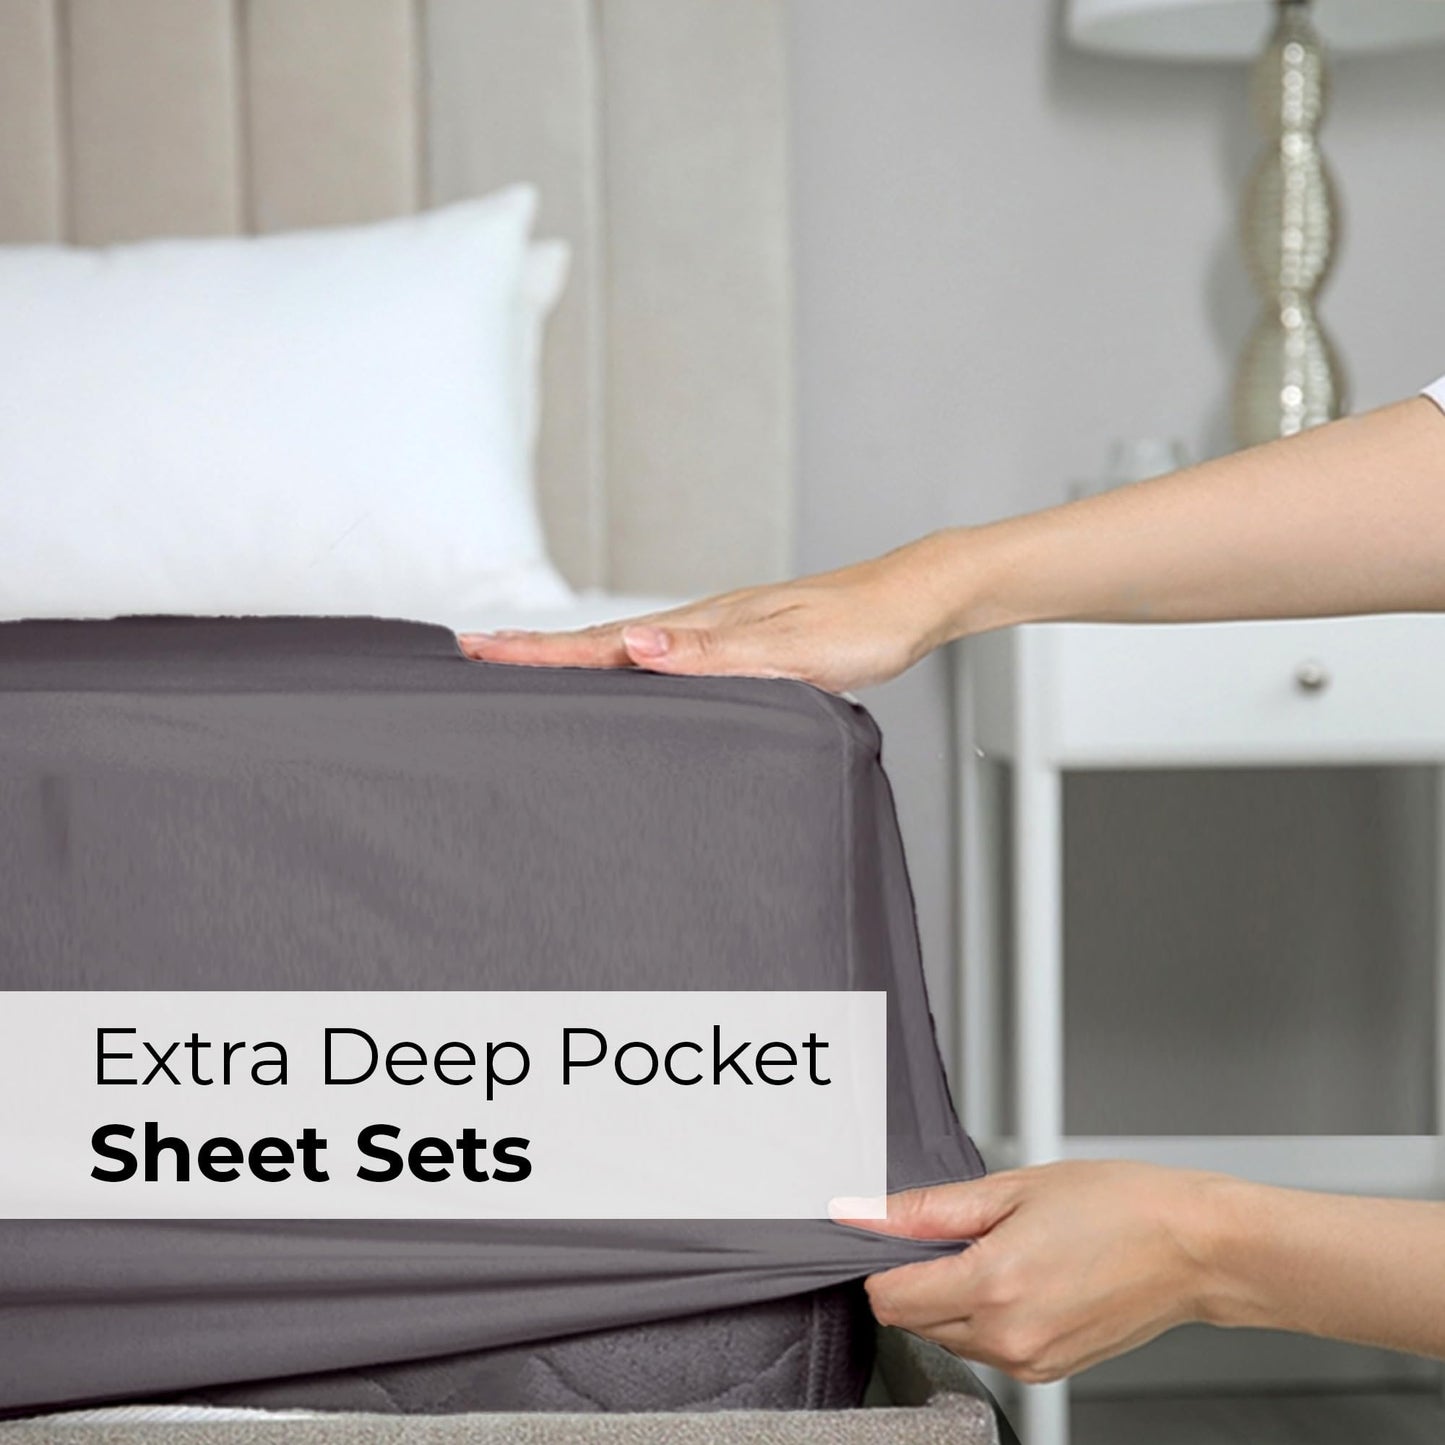 Extra Deep Twin XL Sheet Set - 4 Piece Breathable & Cooling Sheets - Hotel Luxury Bed Sheets Set - Easy & Secure Fit - Soft, Wrinkle Free & Comfy Sheets Set - Grey Sheet Set w/Extra Deep Pockets